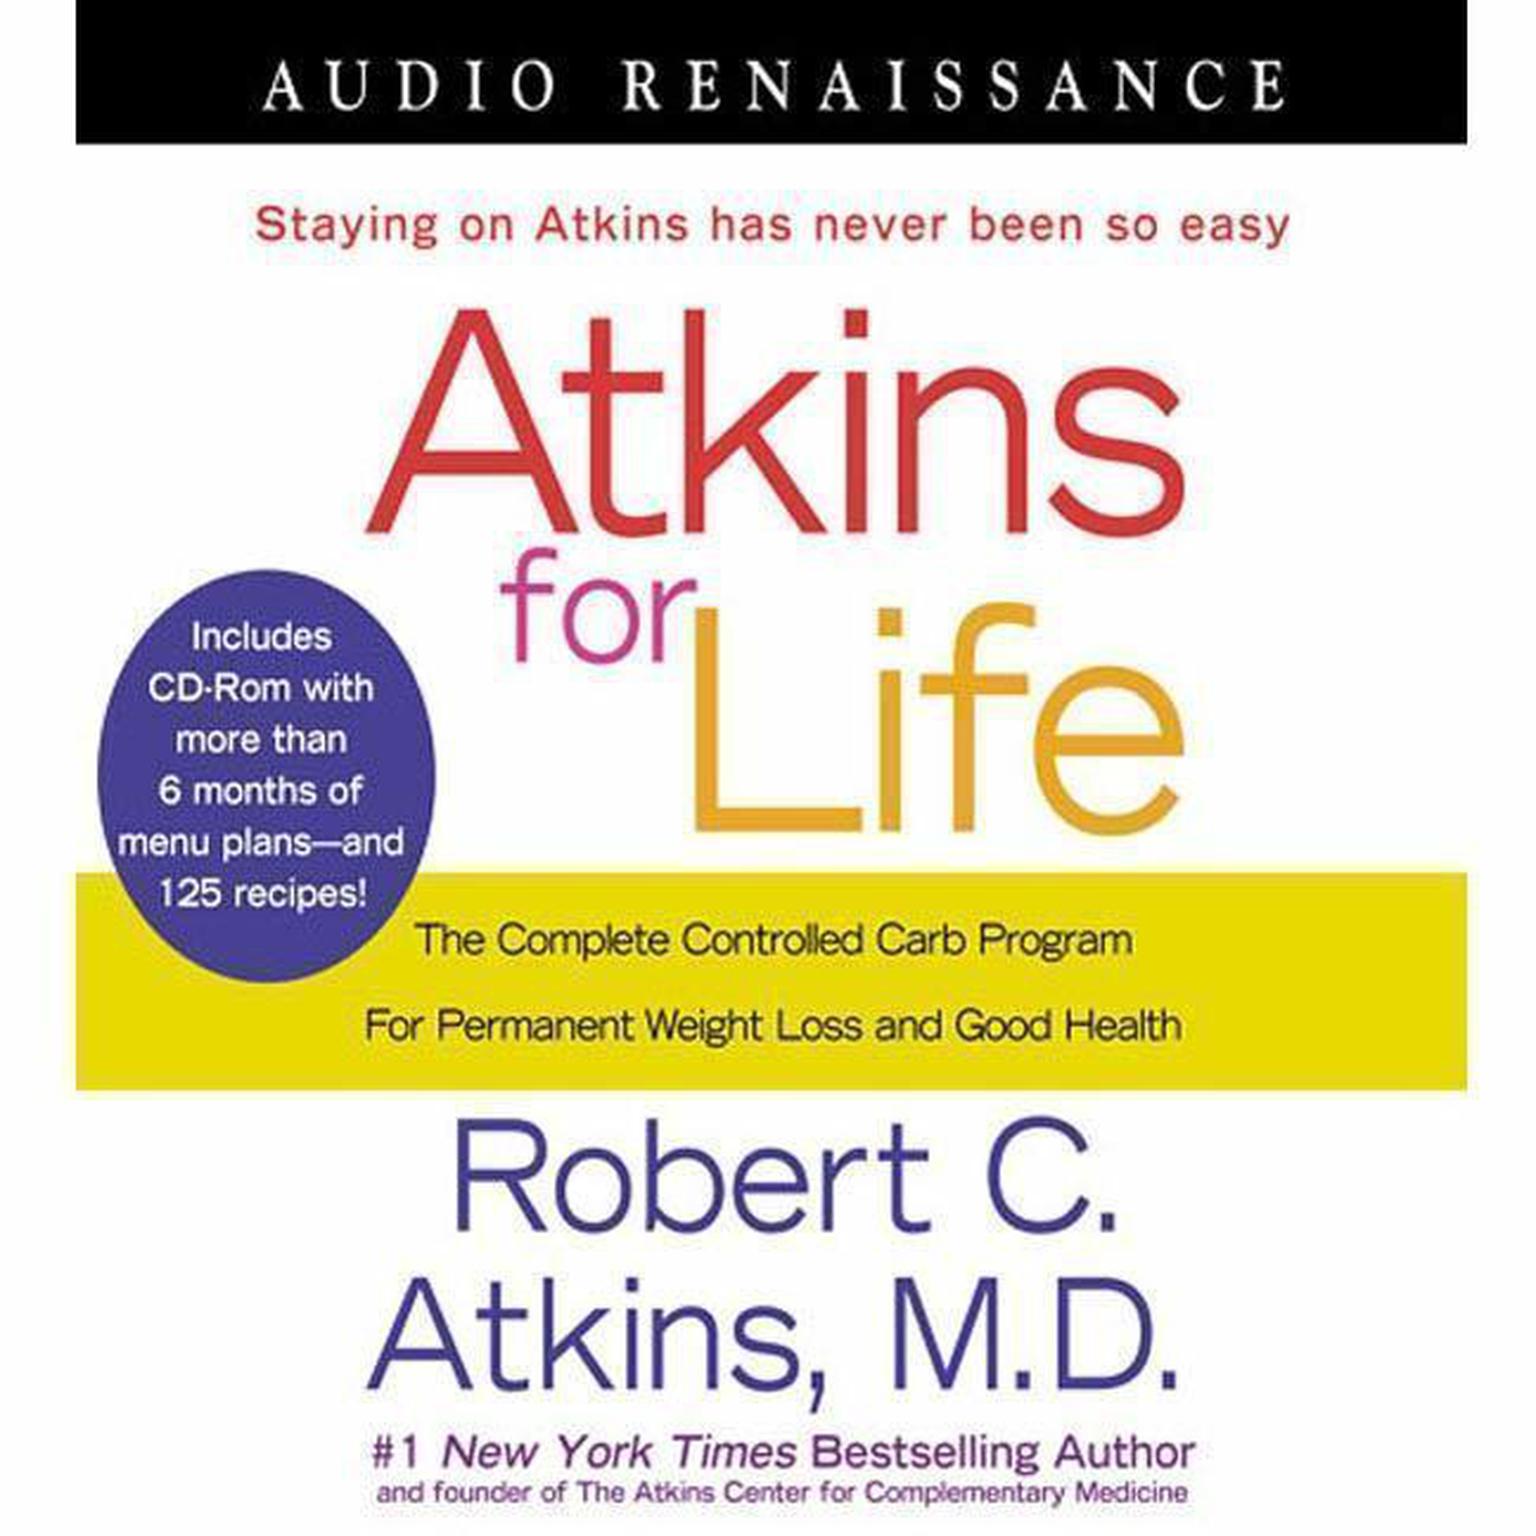 Atkins for Life (Abridged): The Complete Controlled Carb Program for Permanent Weight Loss and Good Health Audiobook, by Robert C. Atkins